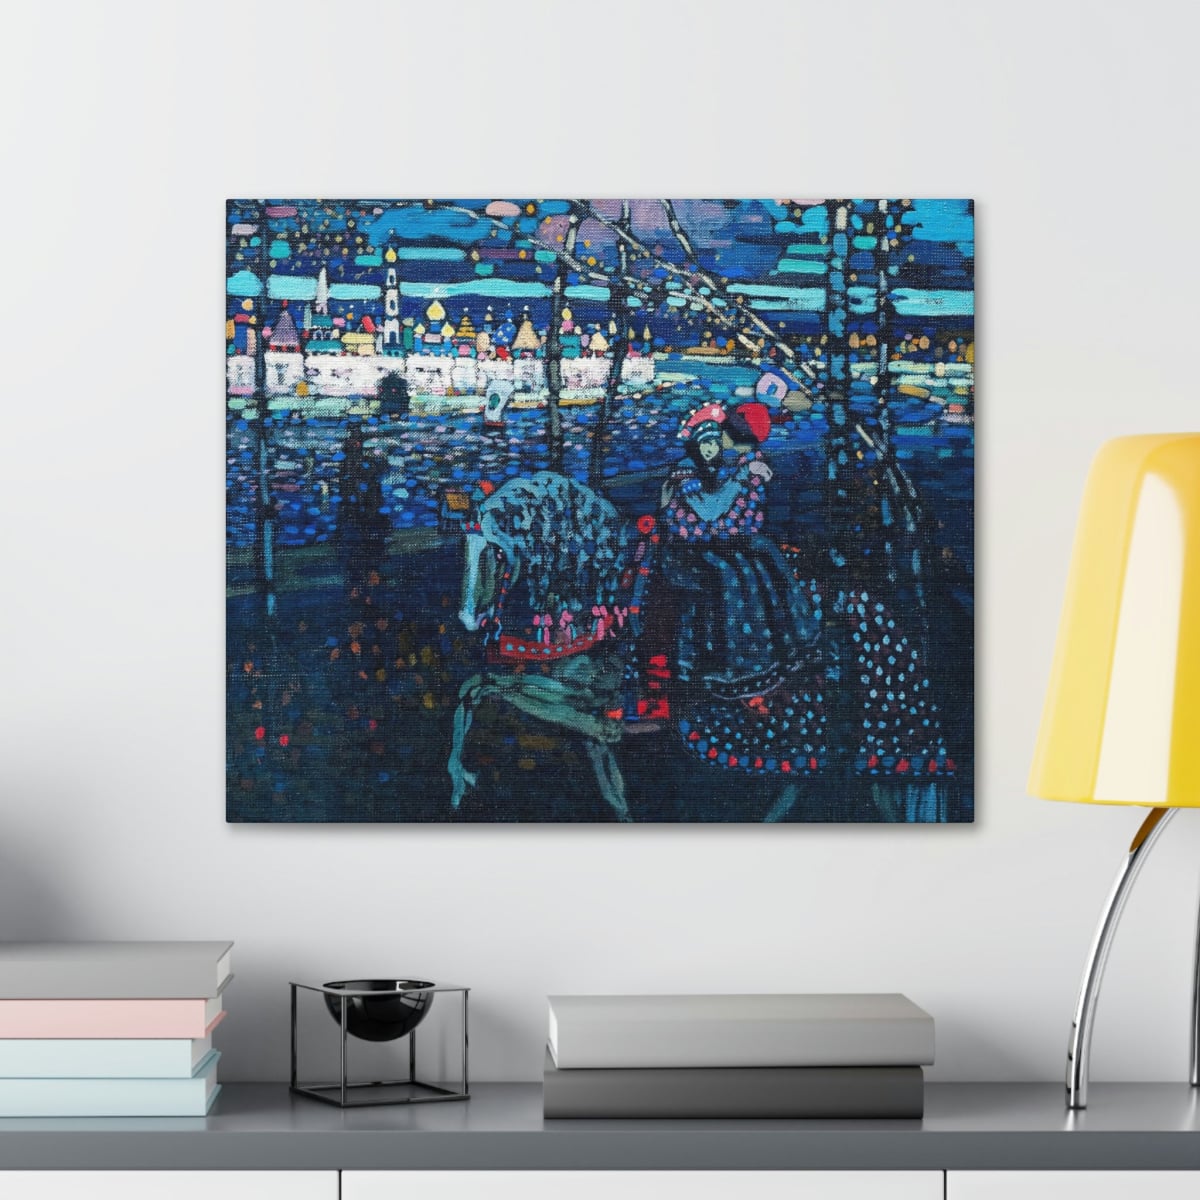 Riding Couple by Wassily Kandinsky Art Canvas Gallery Wraps